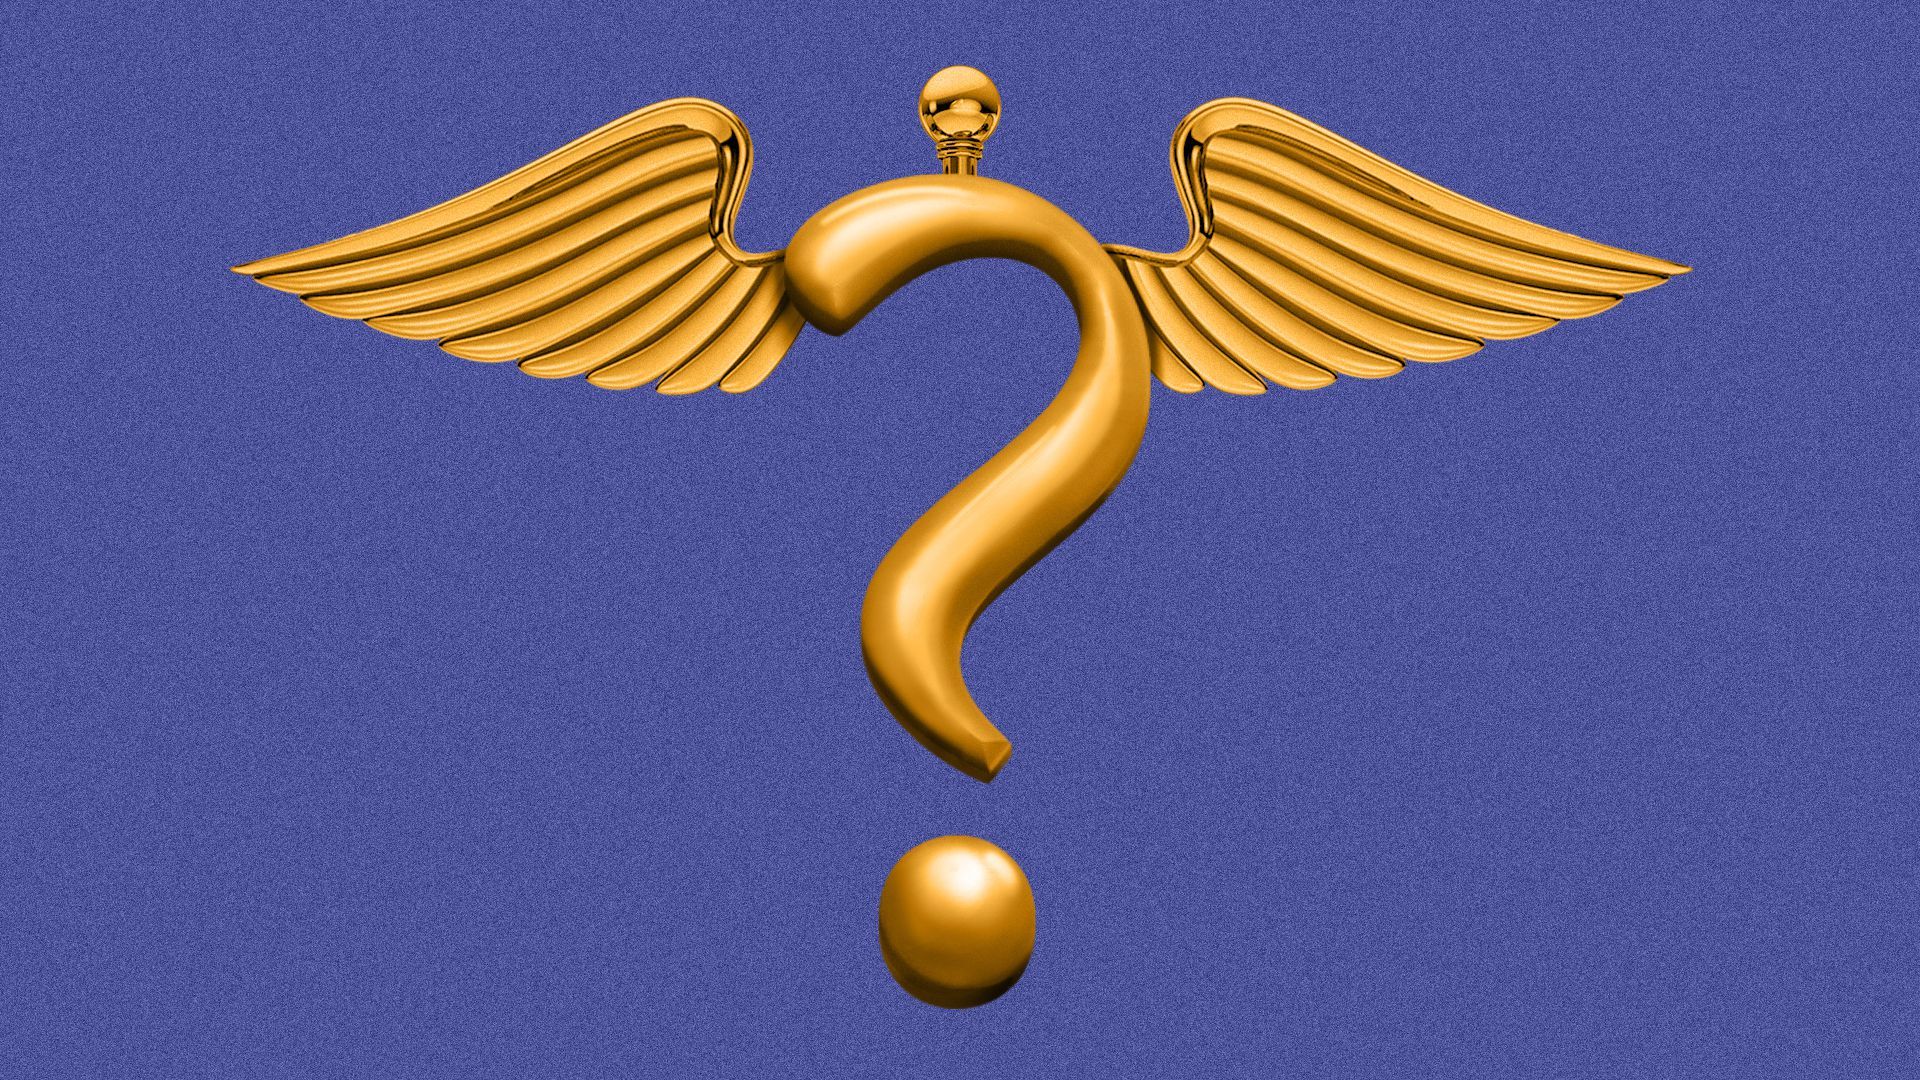 Illustration of a caduceus and question mark.